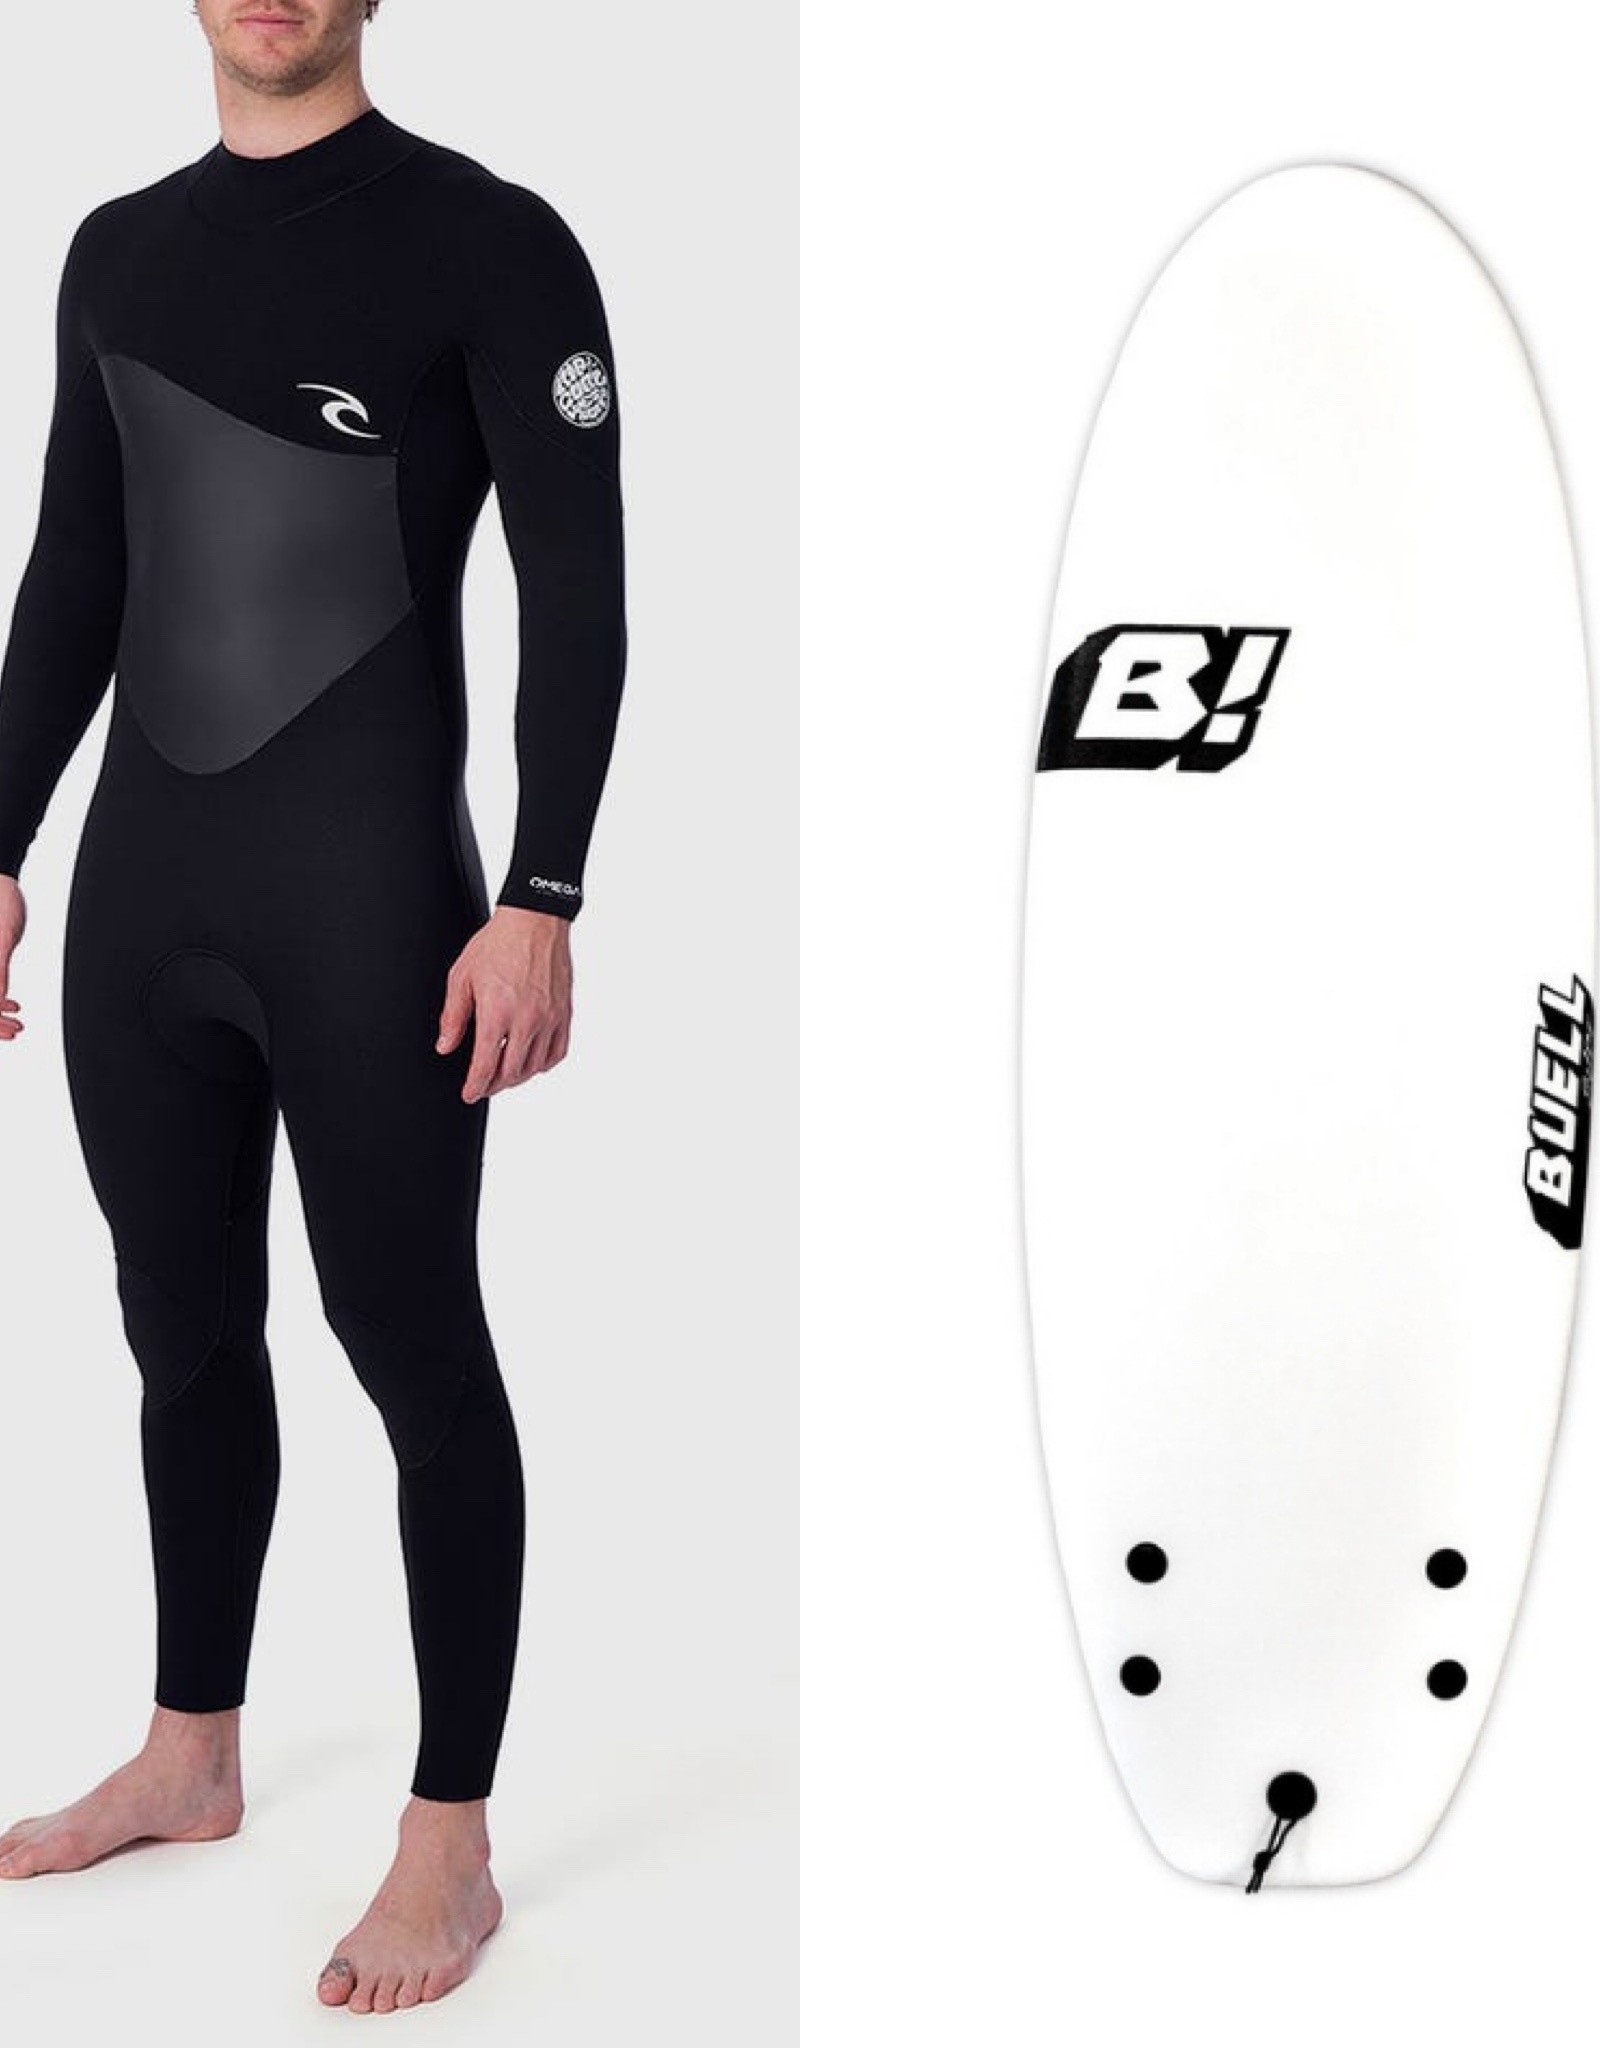 Extra Day Surfboard & Wetsuit Rental